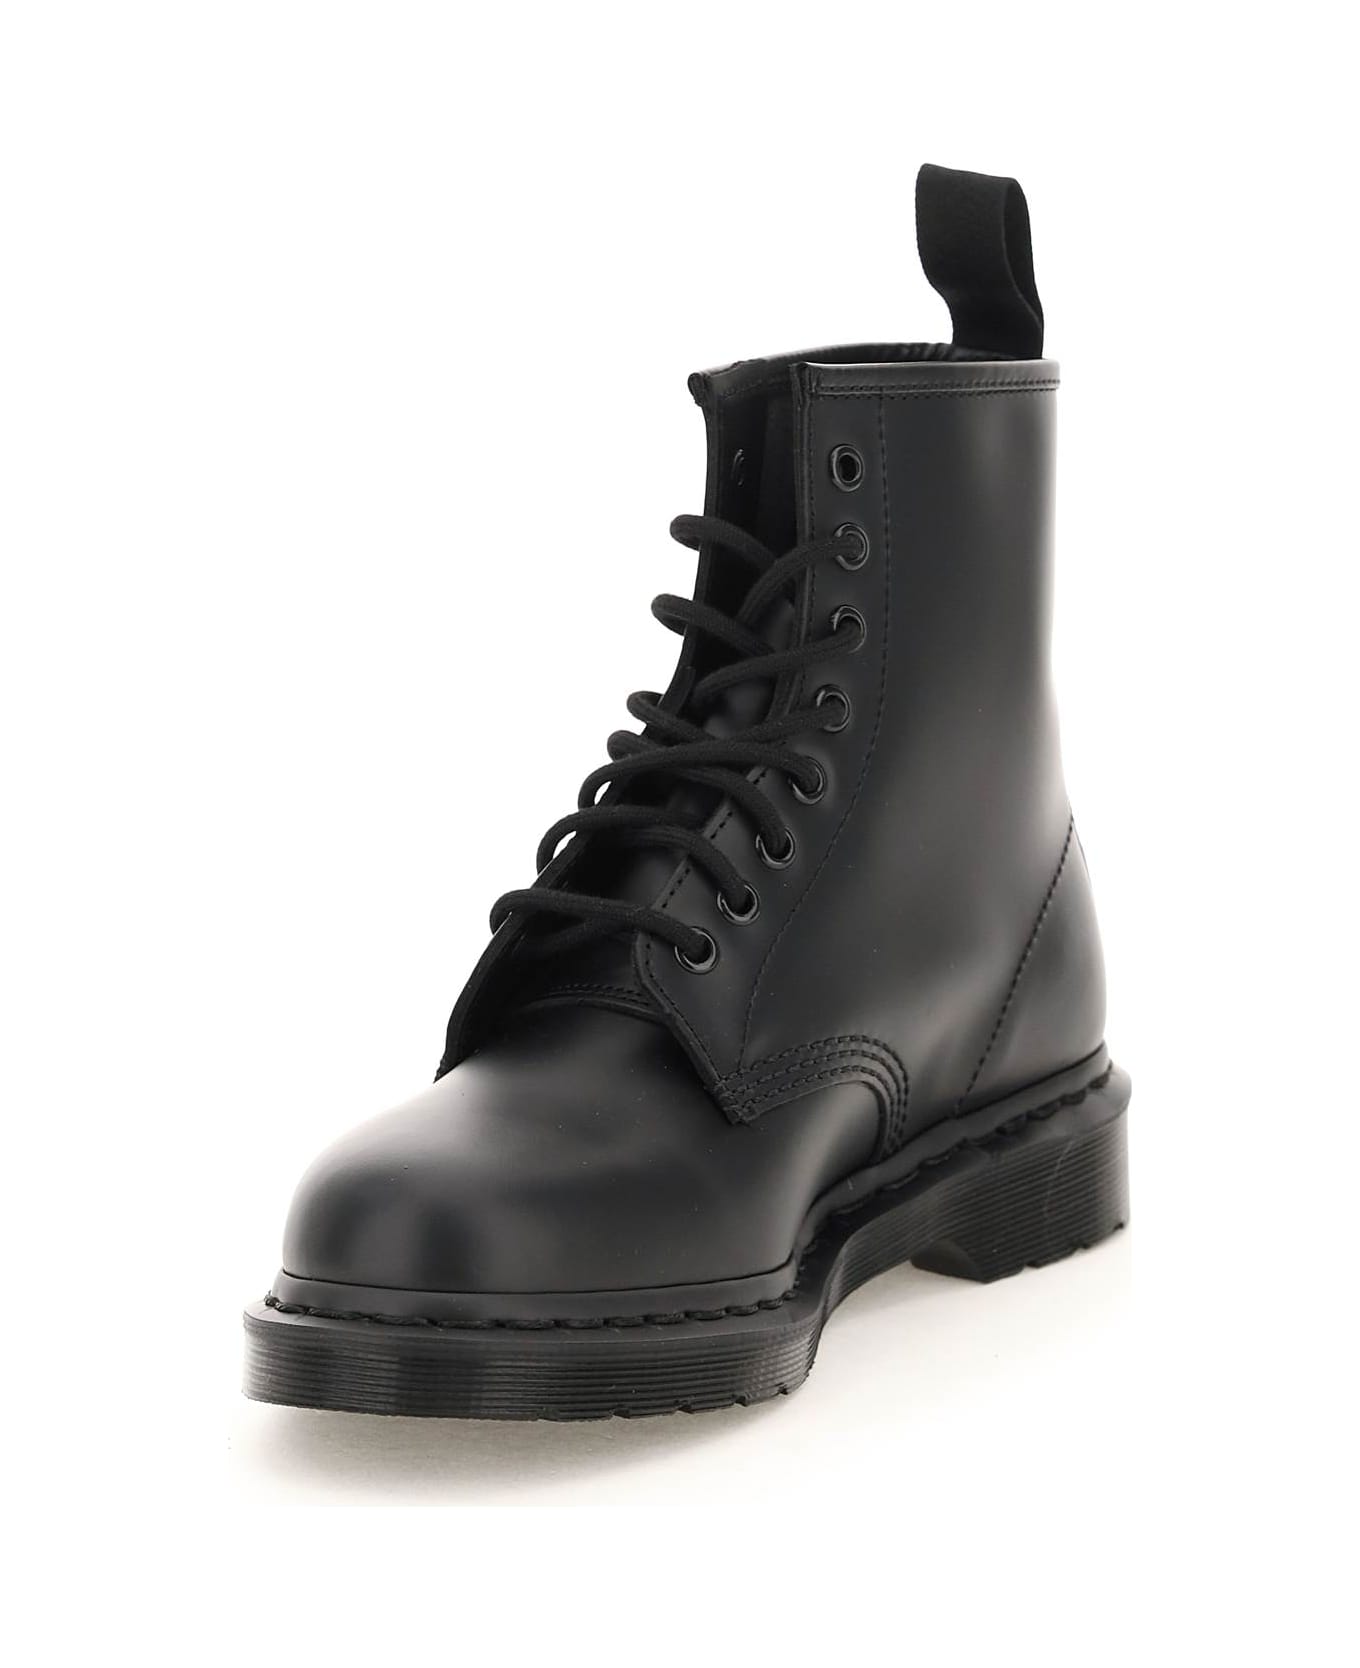 Dr. Martens 1460 Mono Smooth Lace-up Combat Boots - BLACK (Black) ブーツ